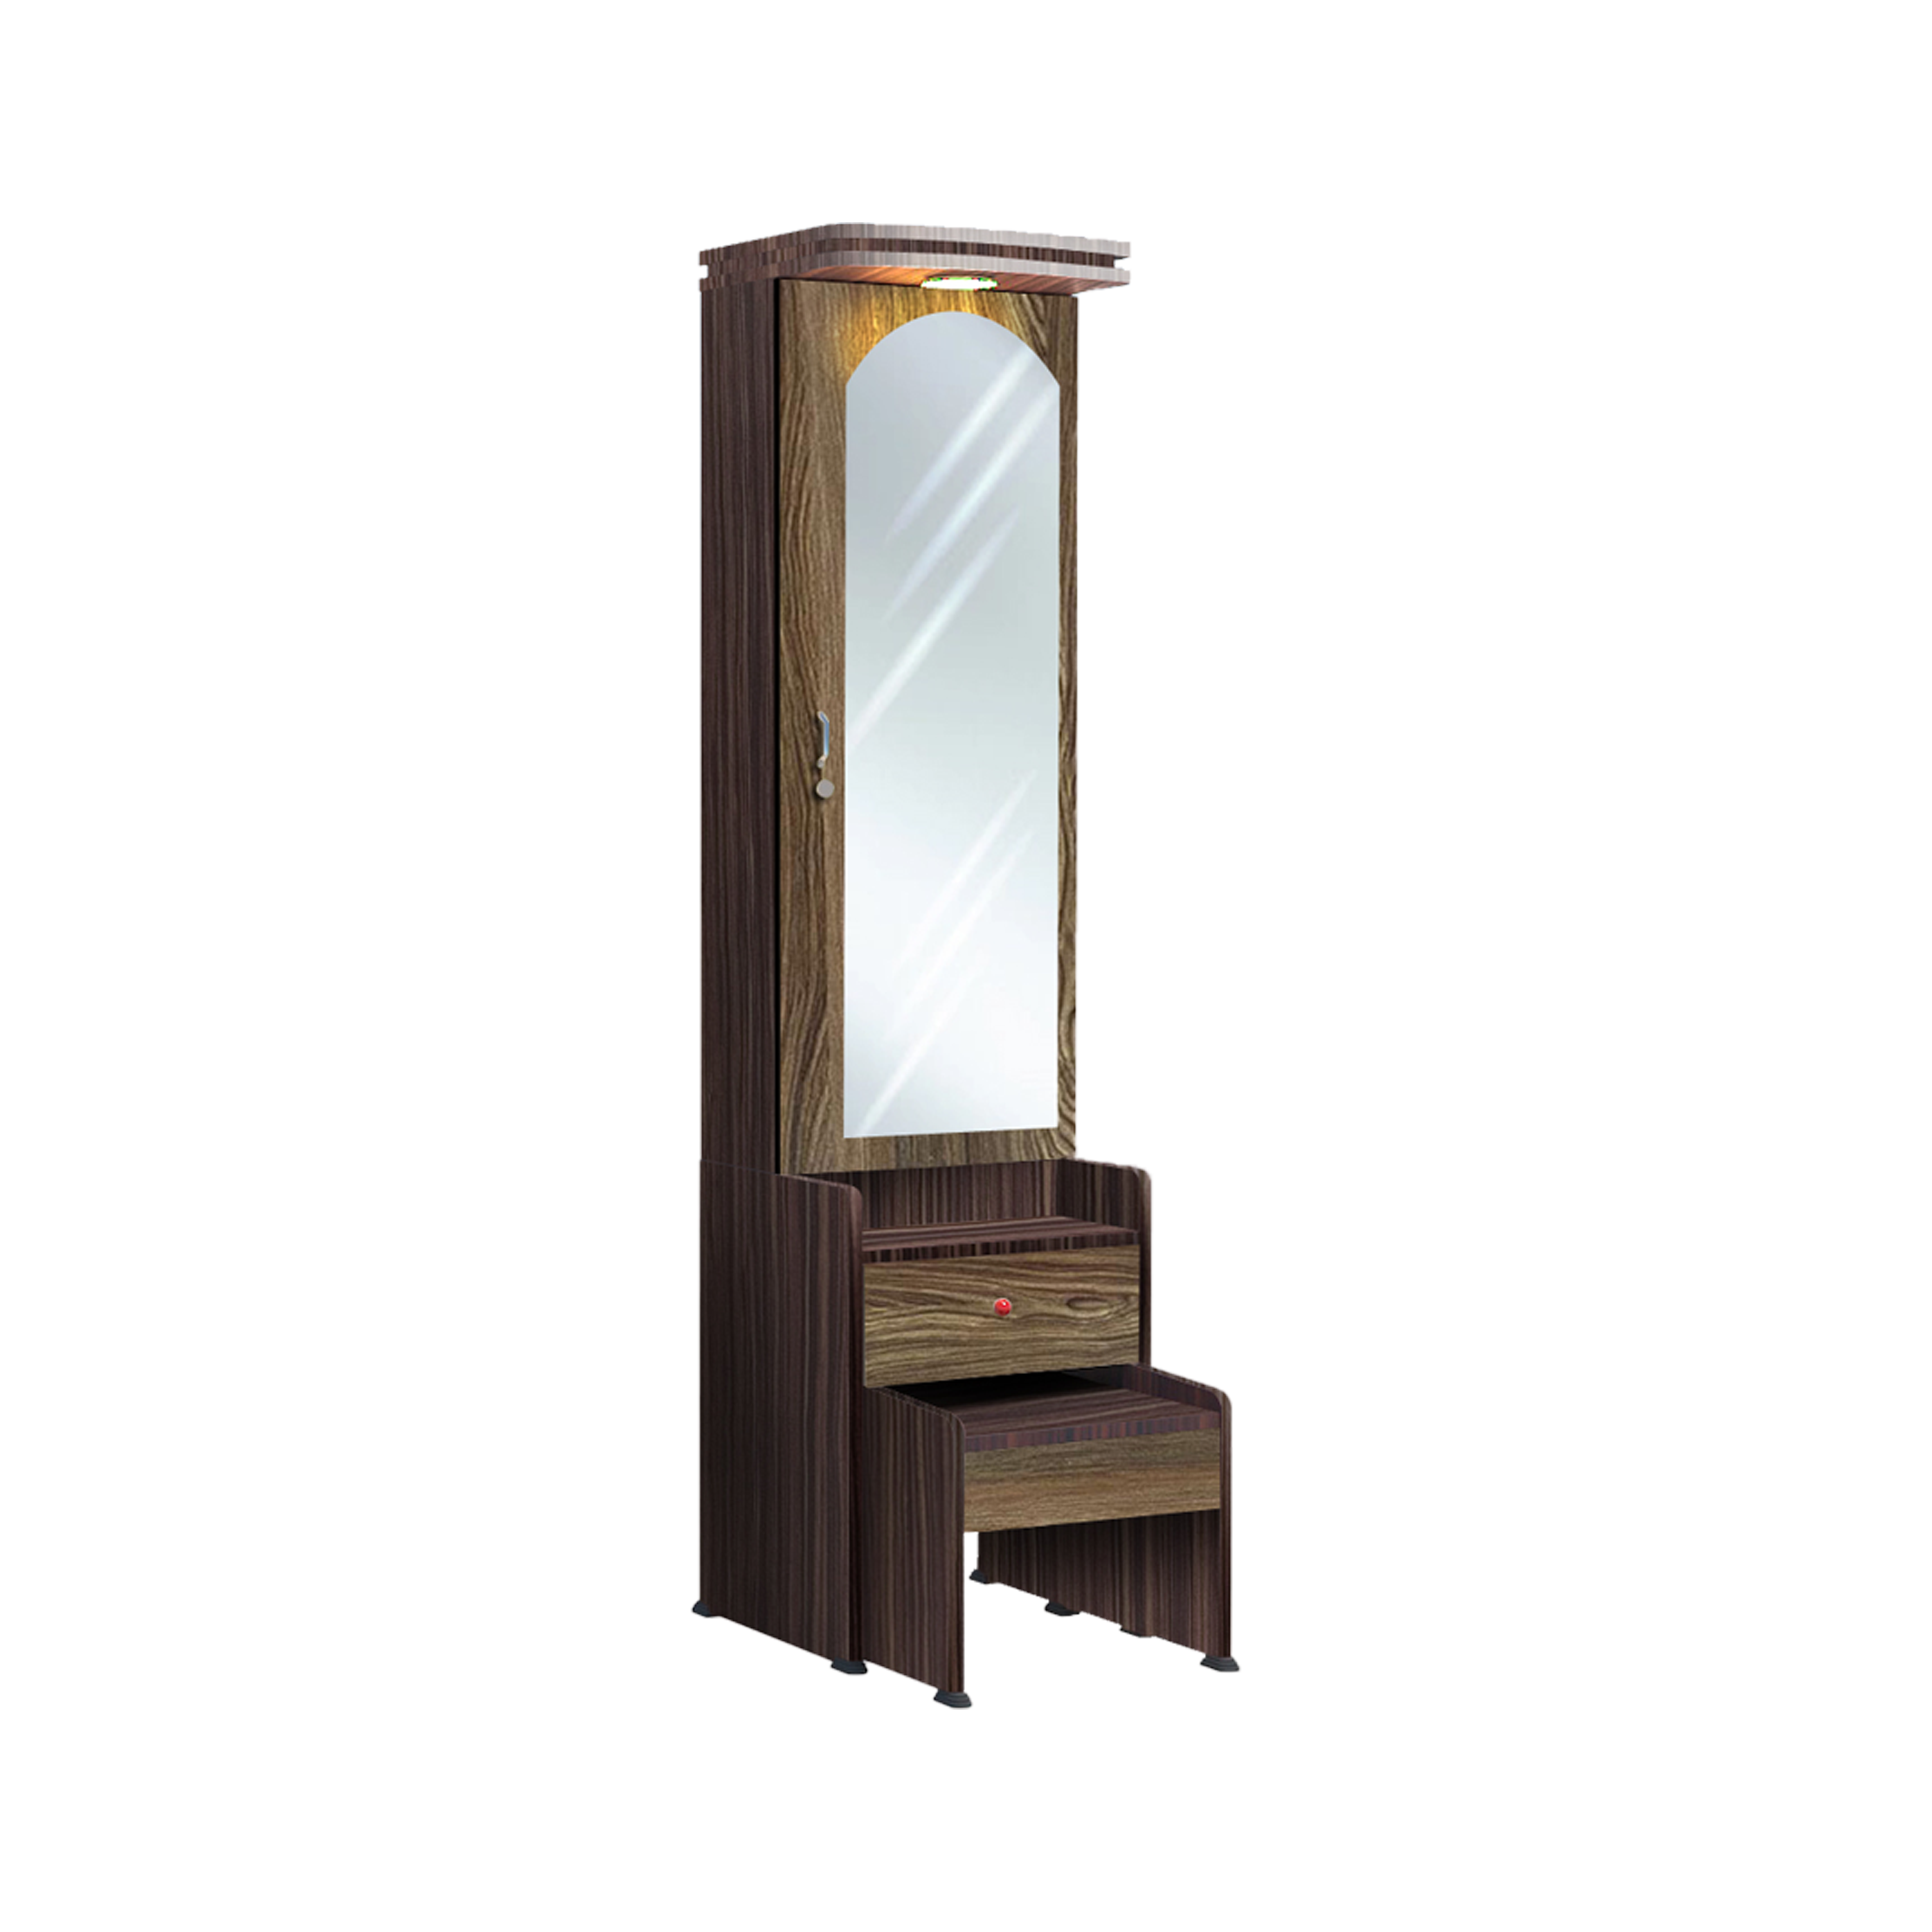 Dressing table - DT003